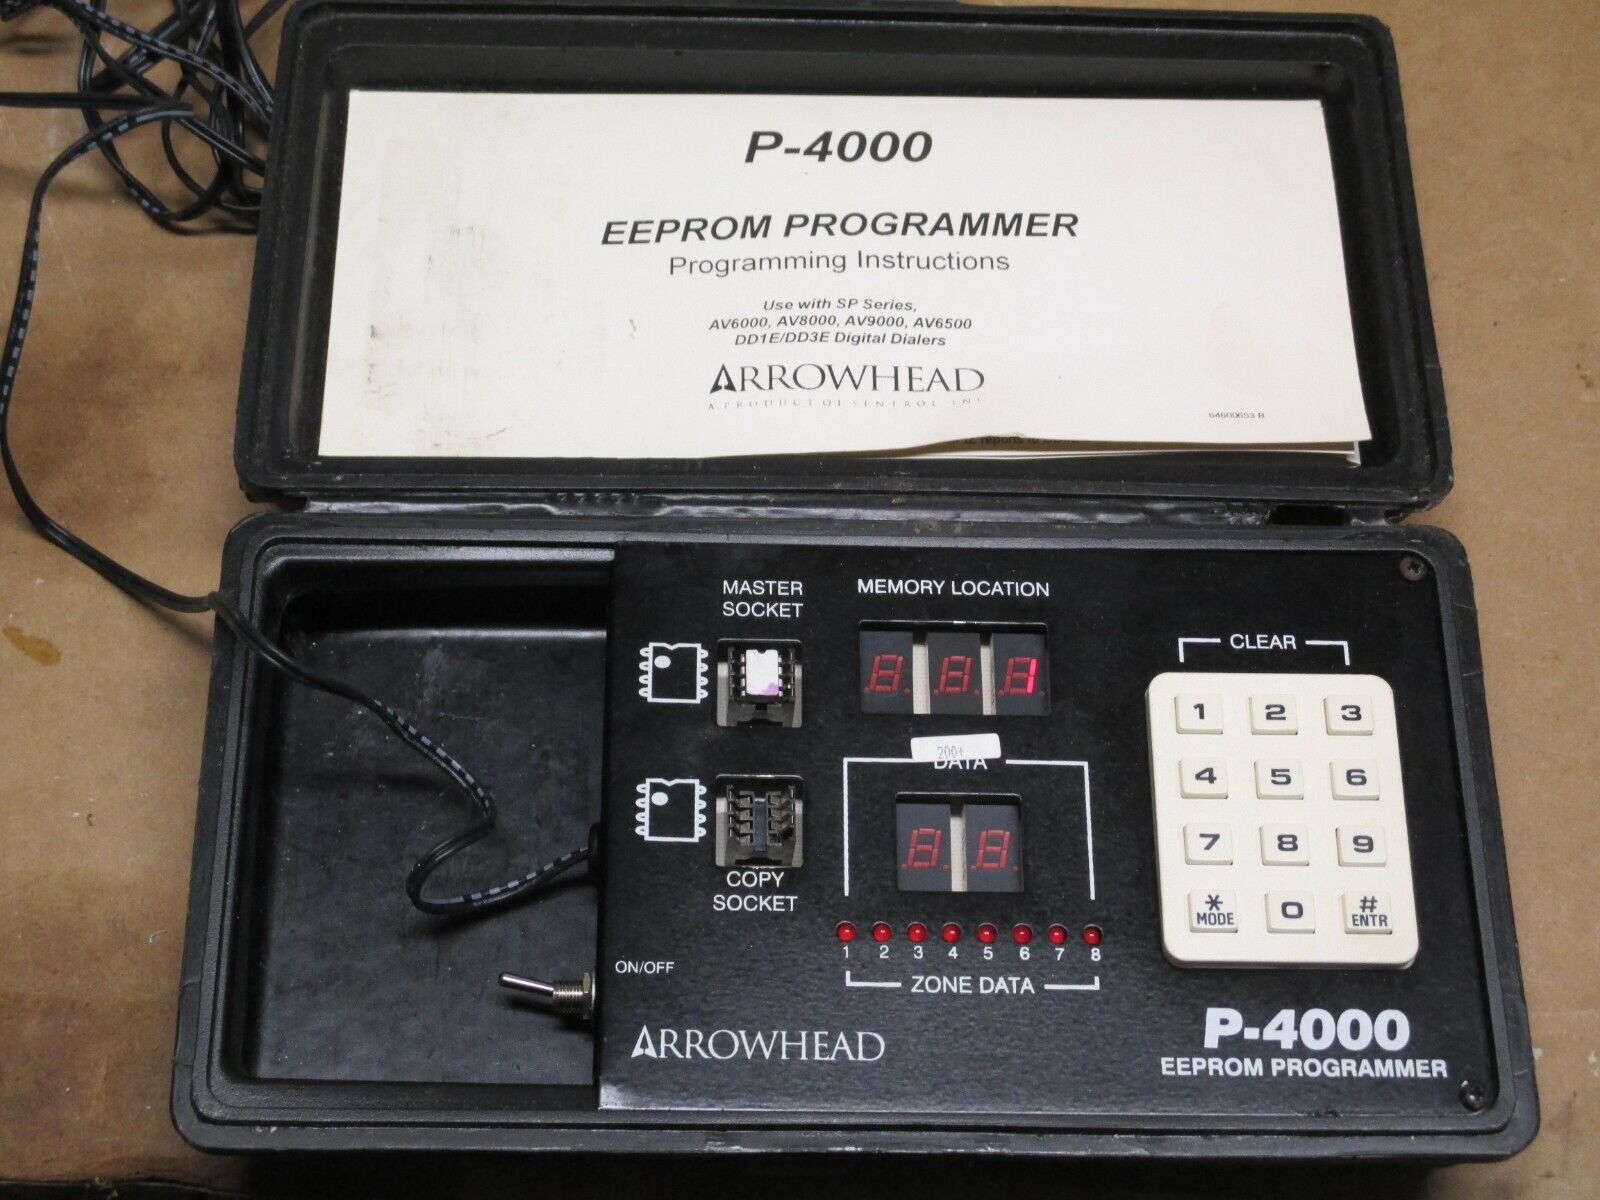 Arrowhead P-4000 EEPROM Programmer Powers Up but UNTESTED